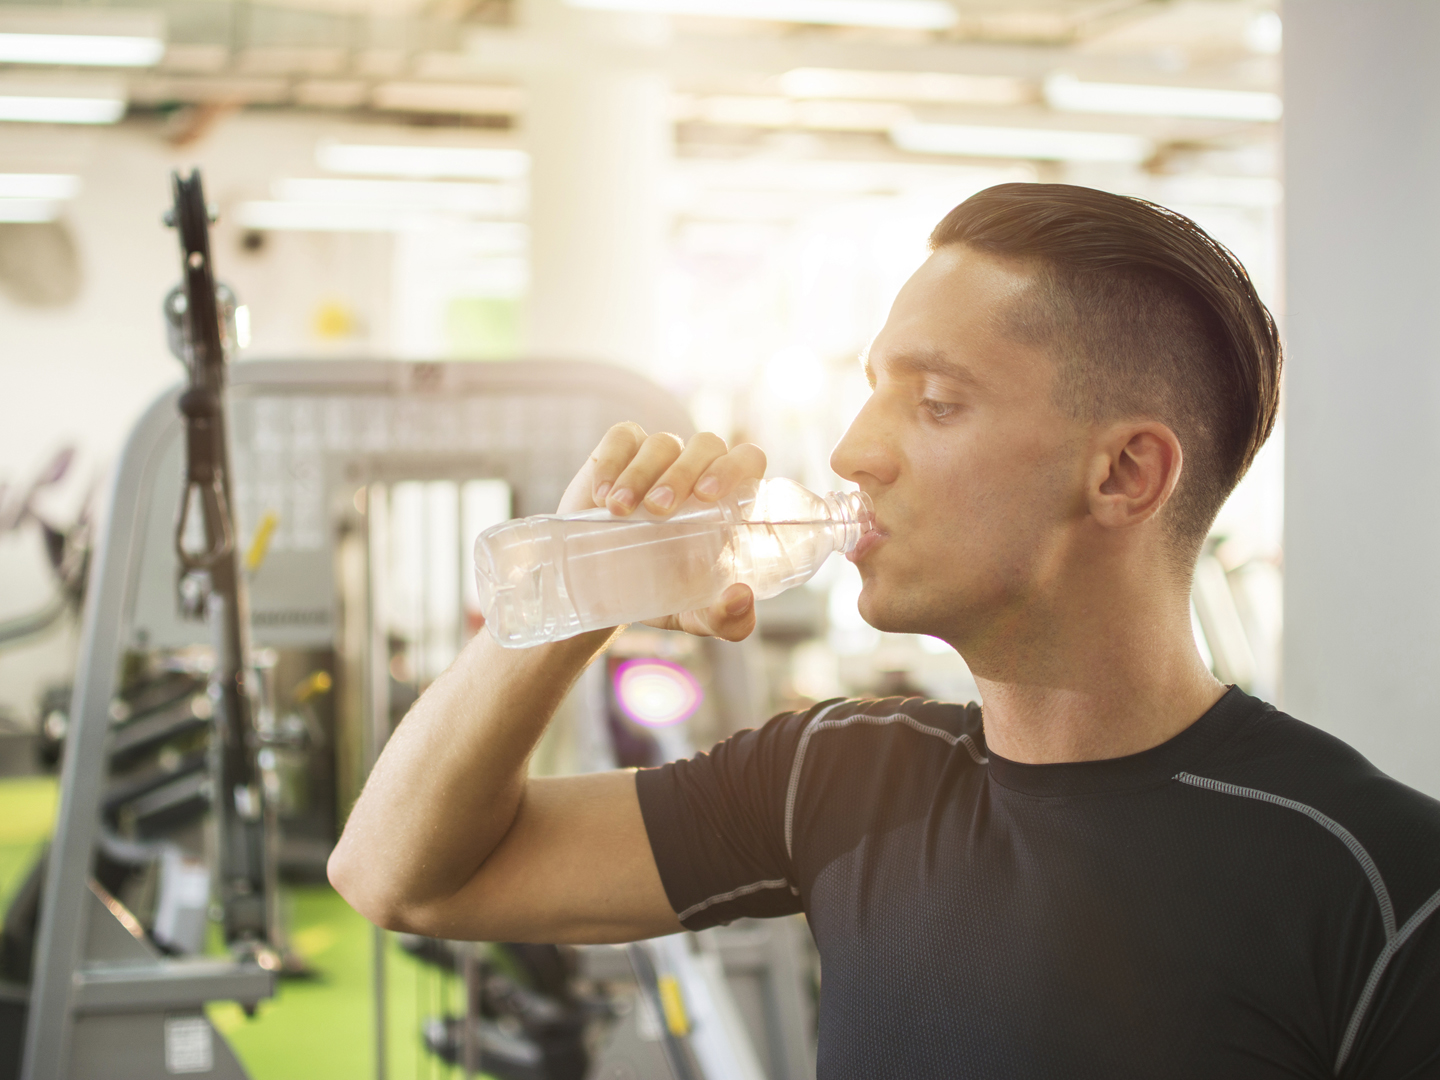 Handsome young man drinking water from a bottle and taking a break from exercising in a gym.